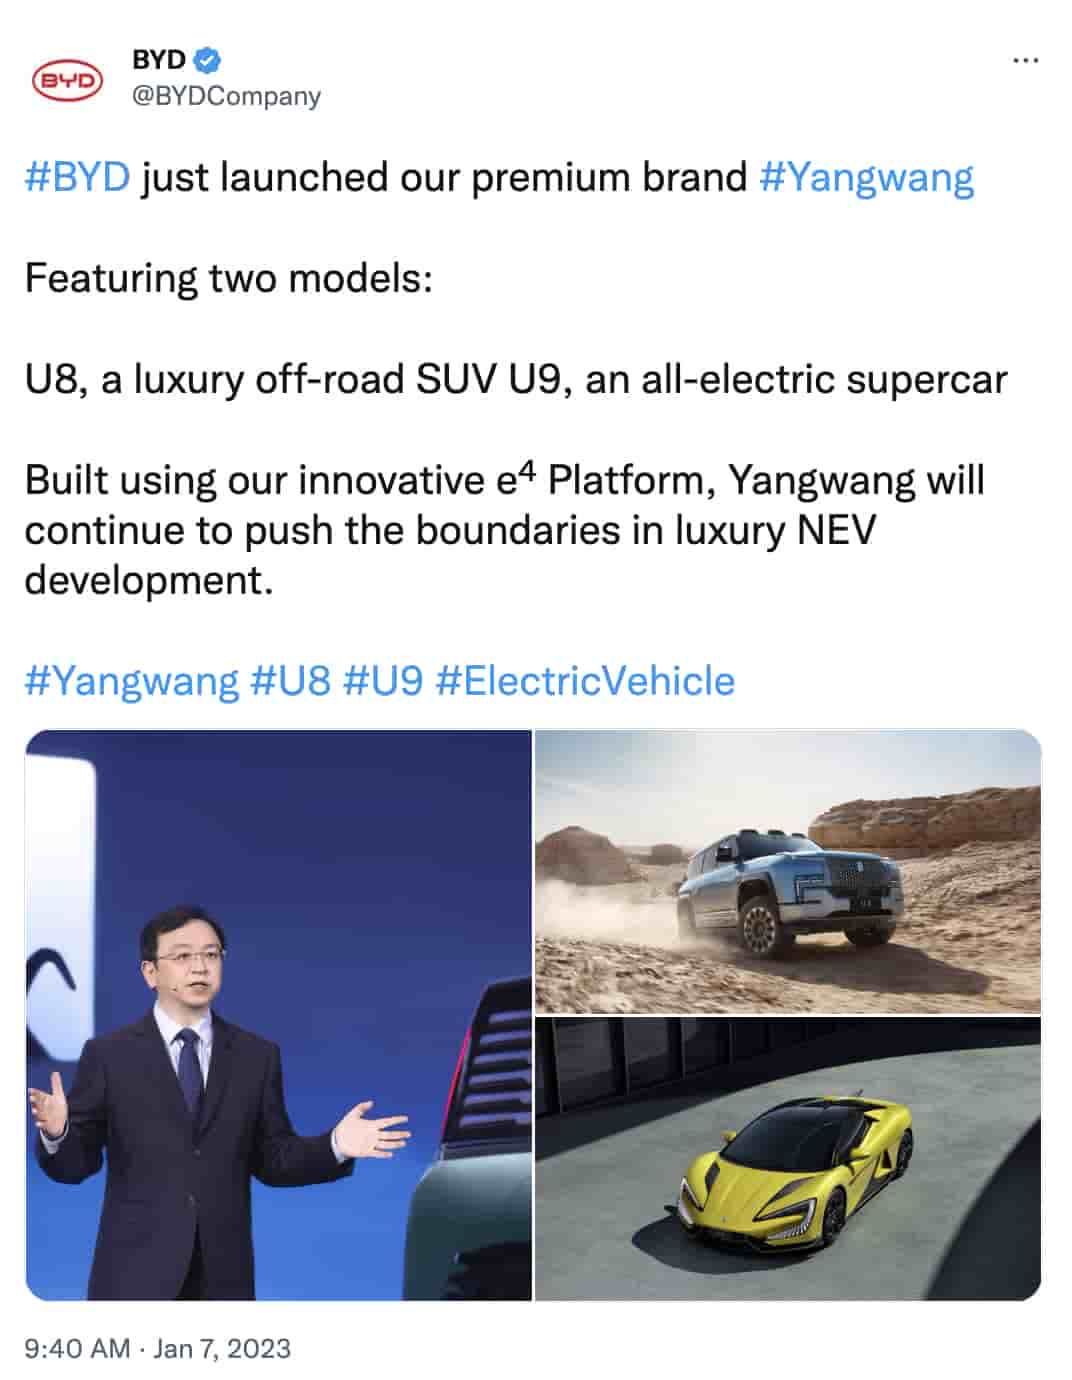 BYD Introduces Seal, Said To Have A 15% Price Edge Over Tesla